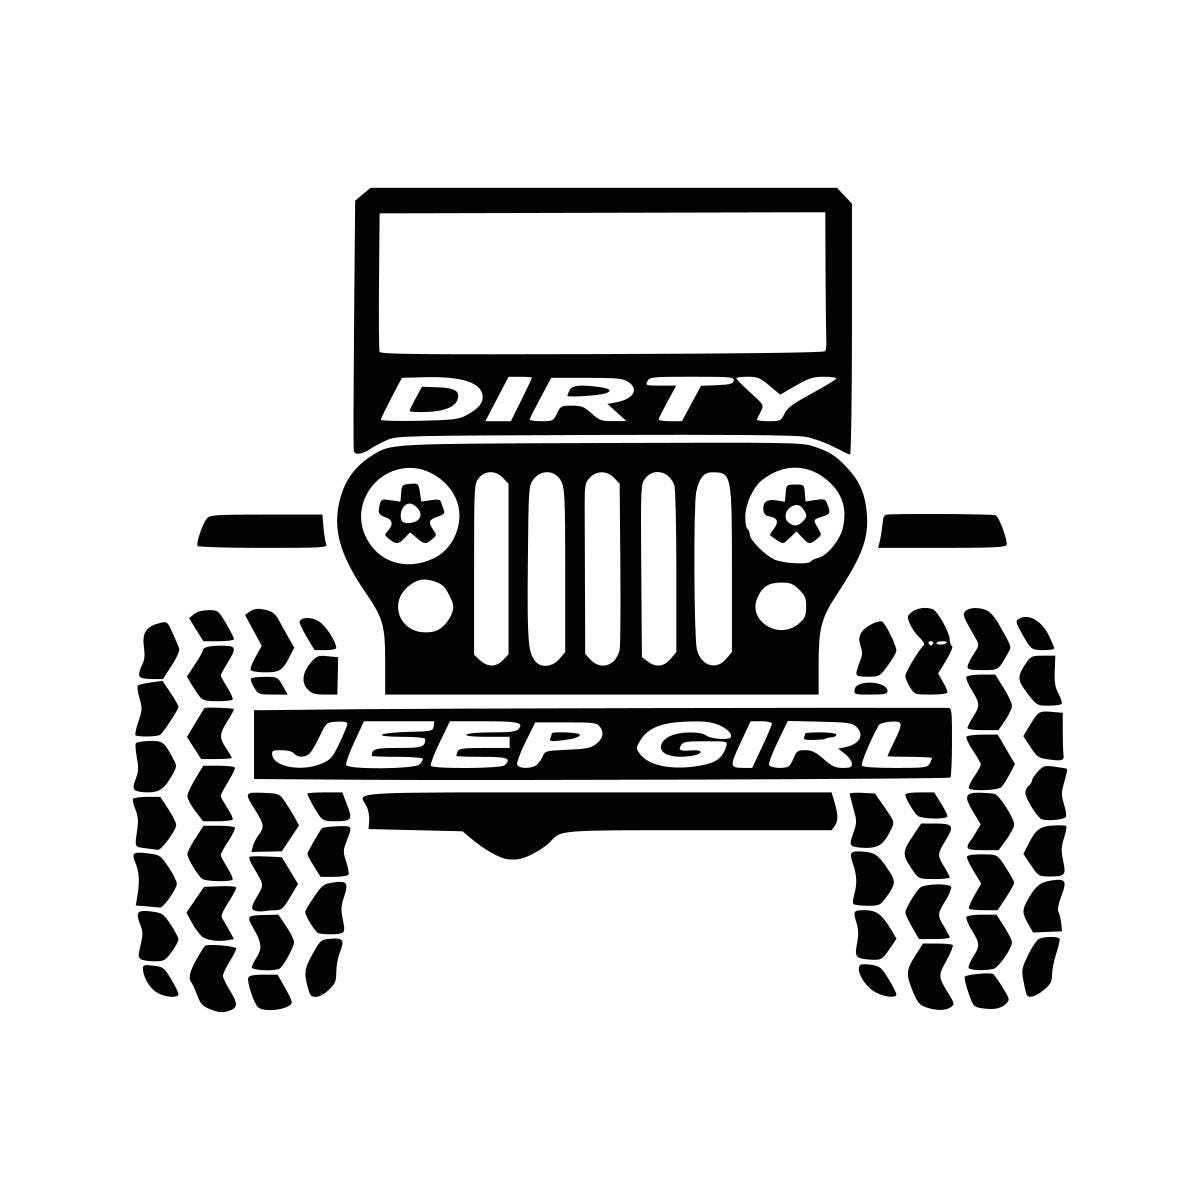 Download Free SVG Cut File - Jeep 4x4 Front view Wrangler Off road Etsy.